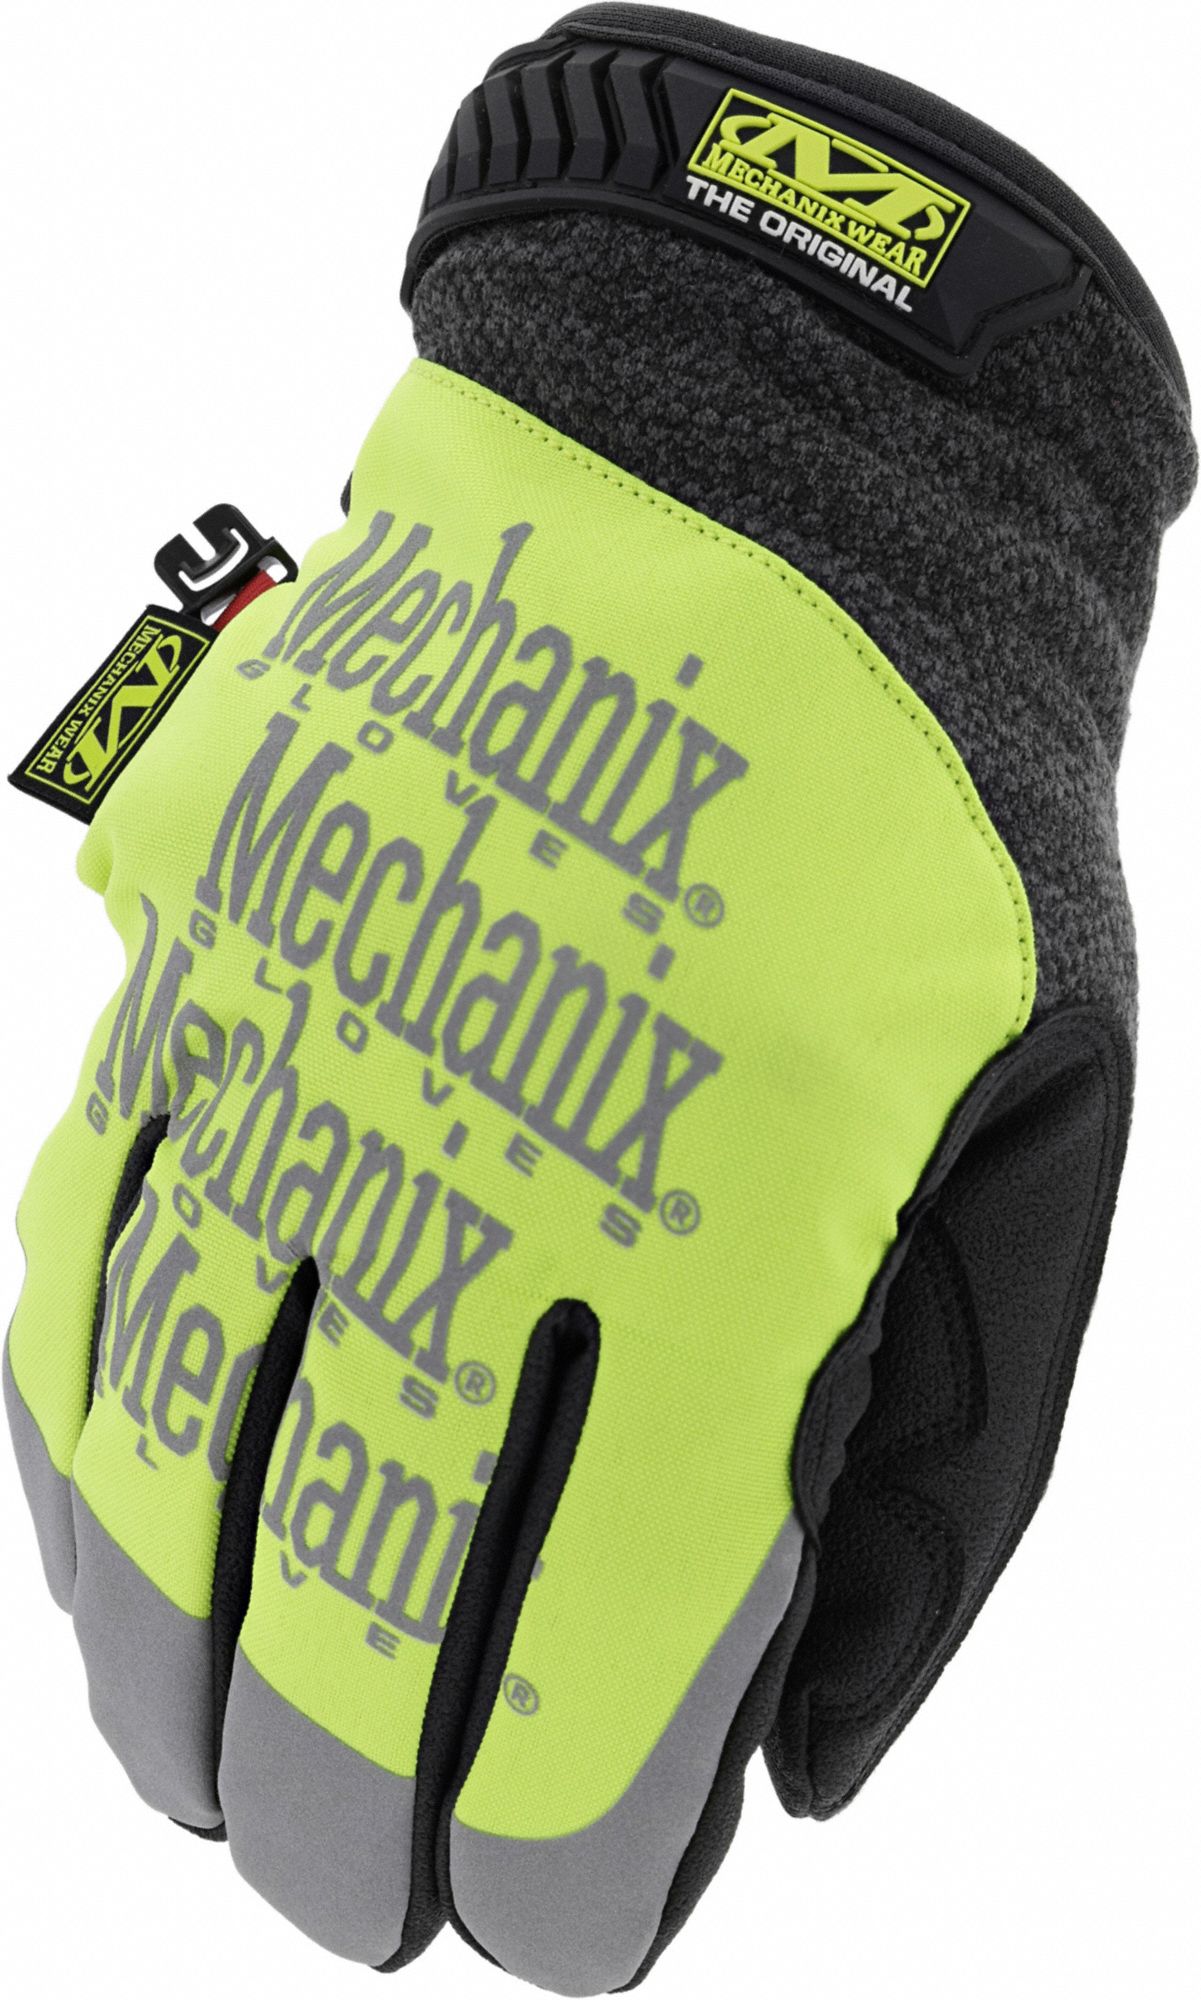 MECHANIX WEAR Large Black Synthetic Leather Cold Weather Gloves